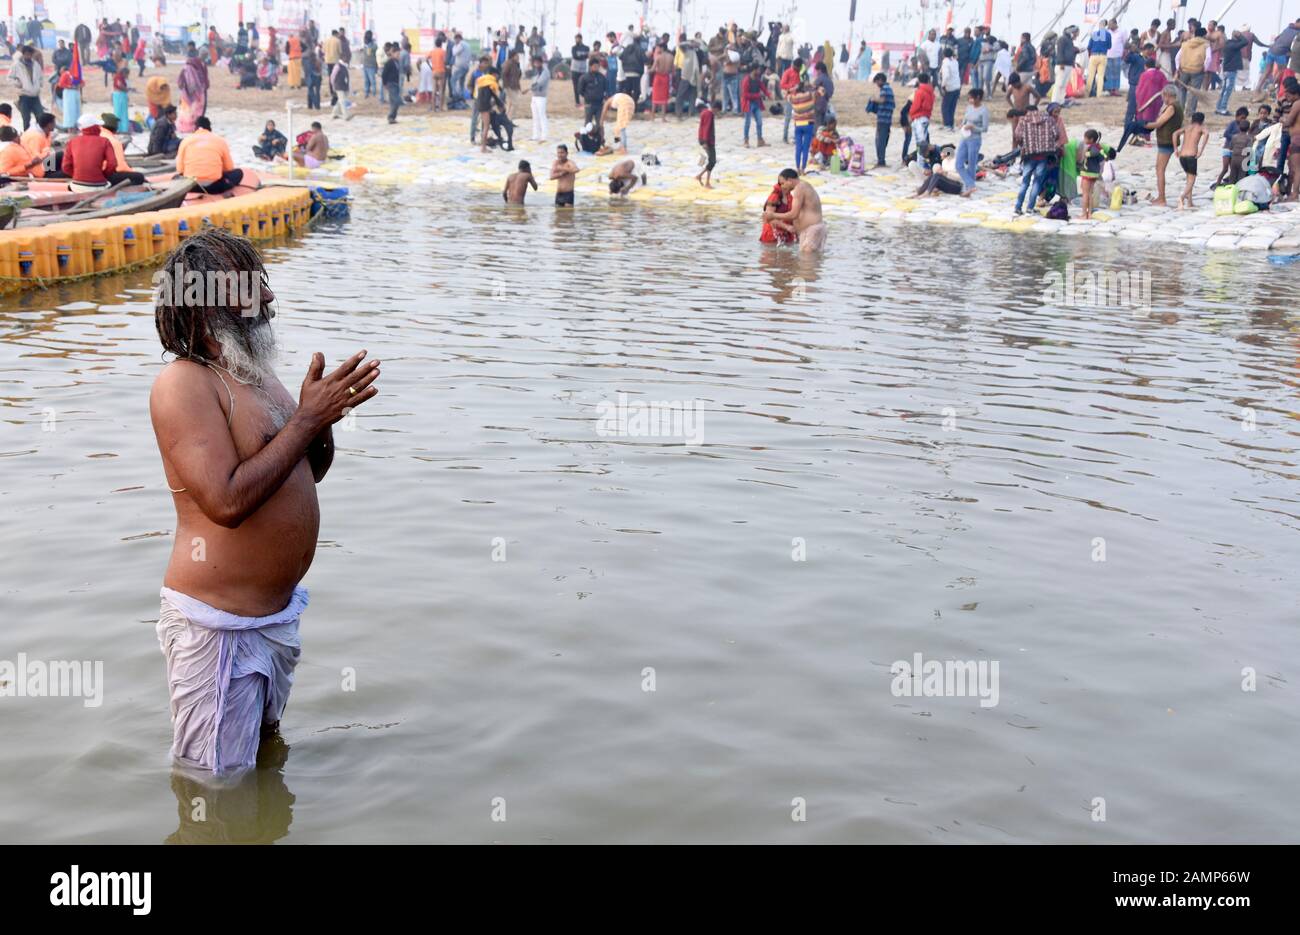 Allahabad, India. 14th Jan, 2020. Allahabad: A sadhu offer prayer after taking holy dip at Sangam, the confluence of three sacred rivers the Yamuna, the Ganges and the mythical Saraswati, during Magh Mela Festival in Prayagraj, Uttar Pradesh state, India, Tuesday, Jan. 14, 2020. (Photo by Prabhat Kumar Verma/Pacific Press) Credit: Pacific Press Agency/Alamy Live News Stock Photo